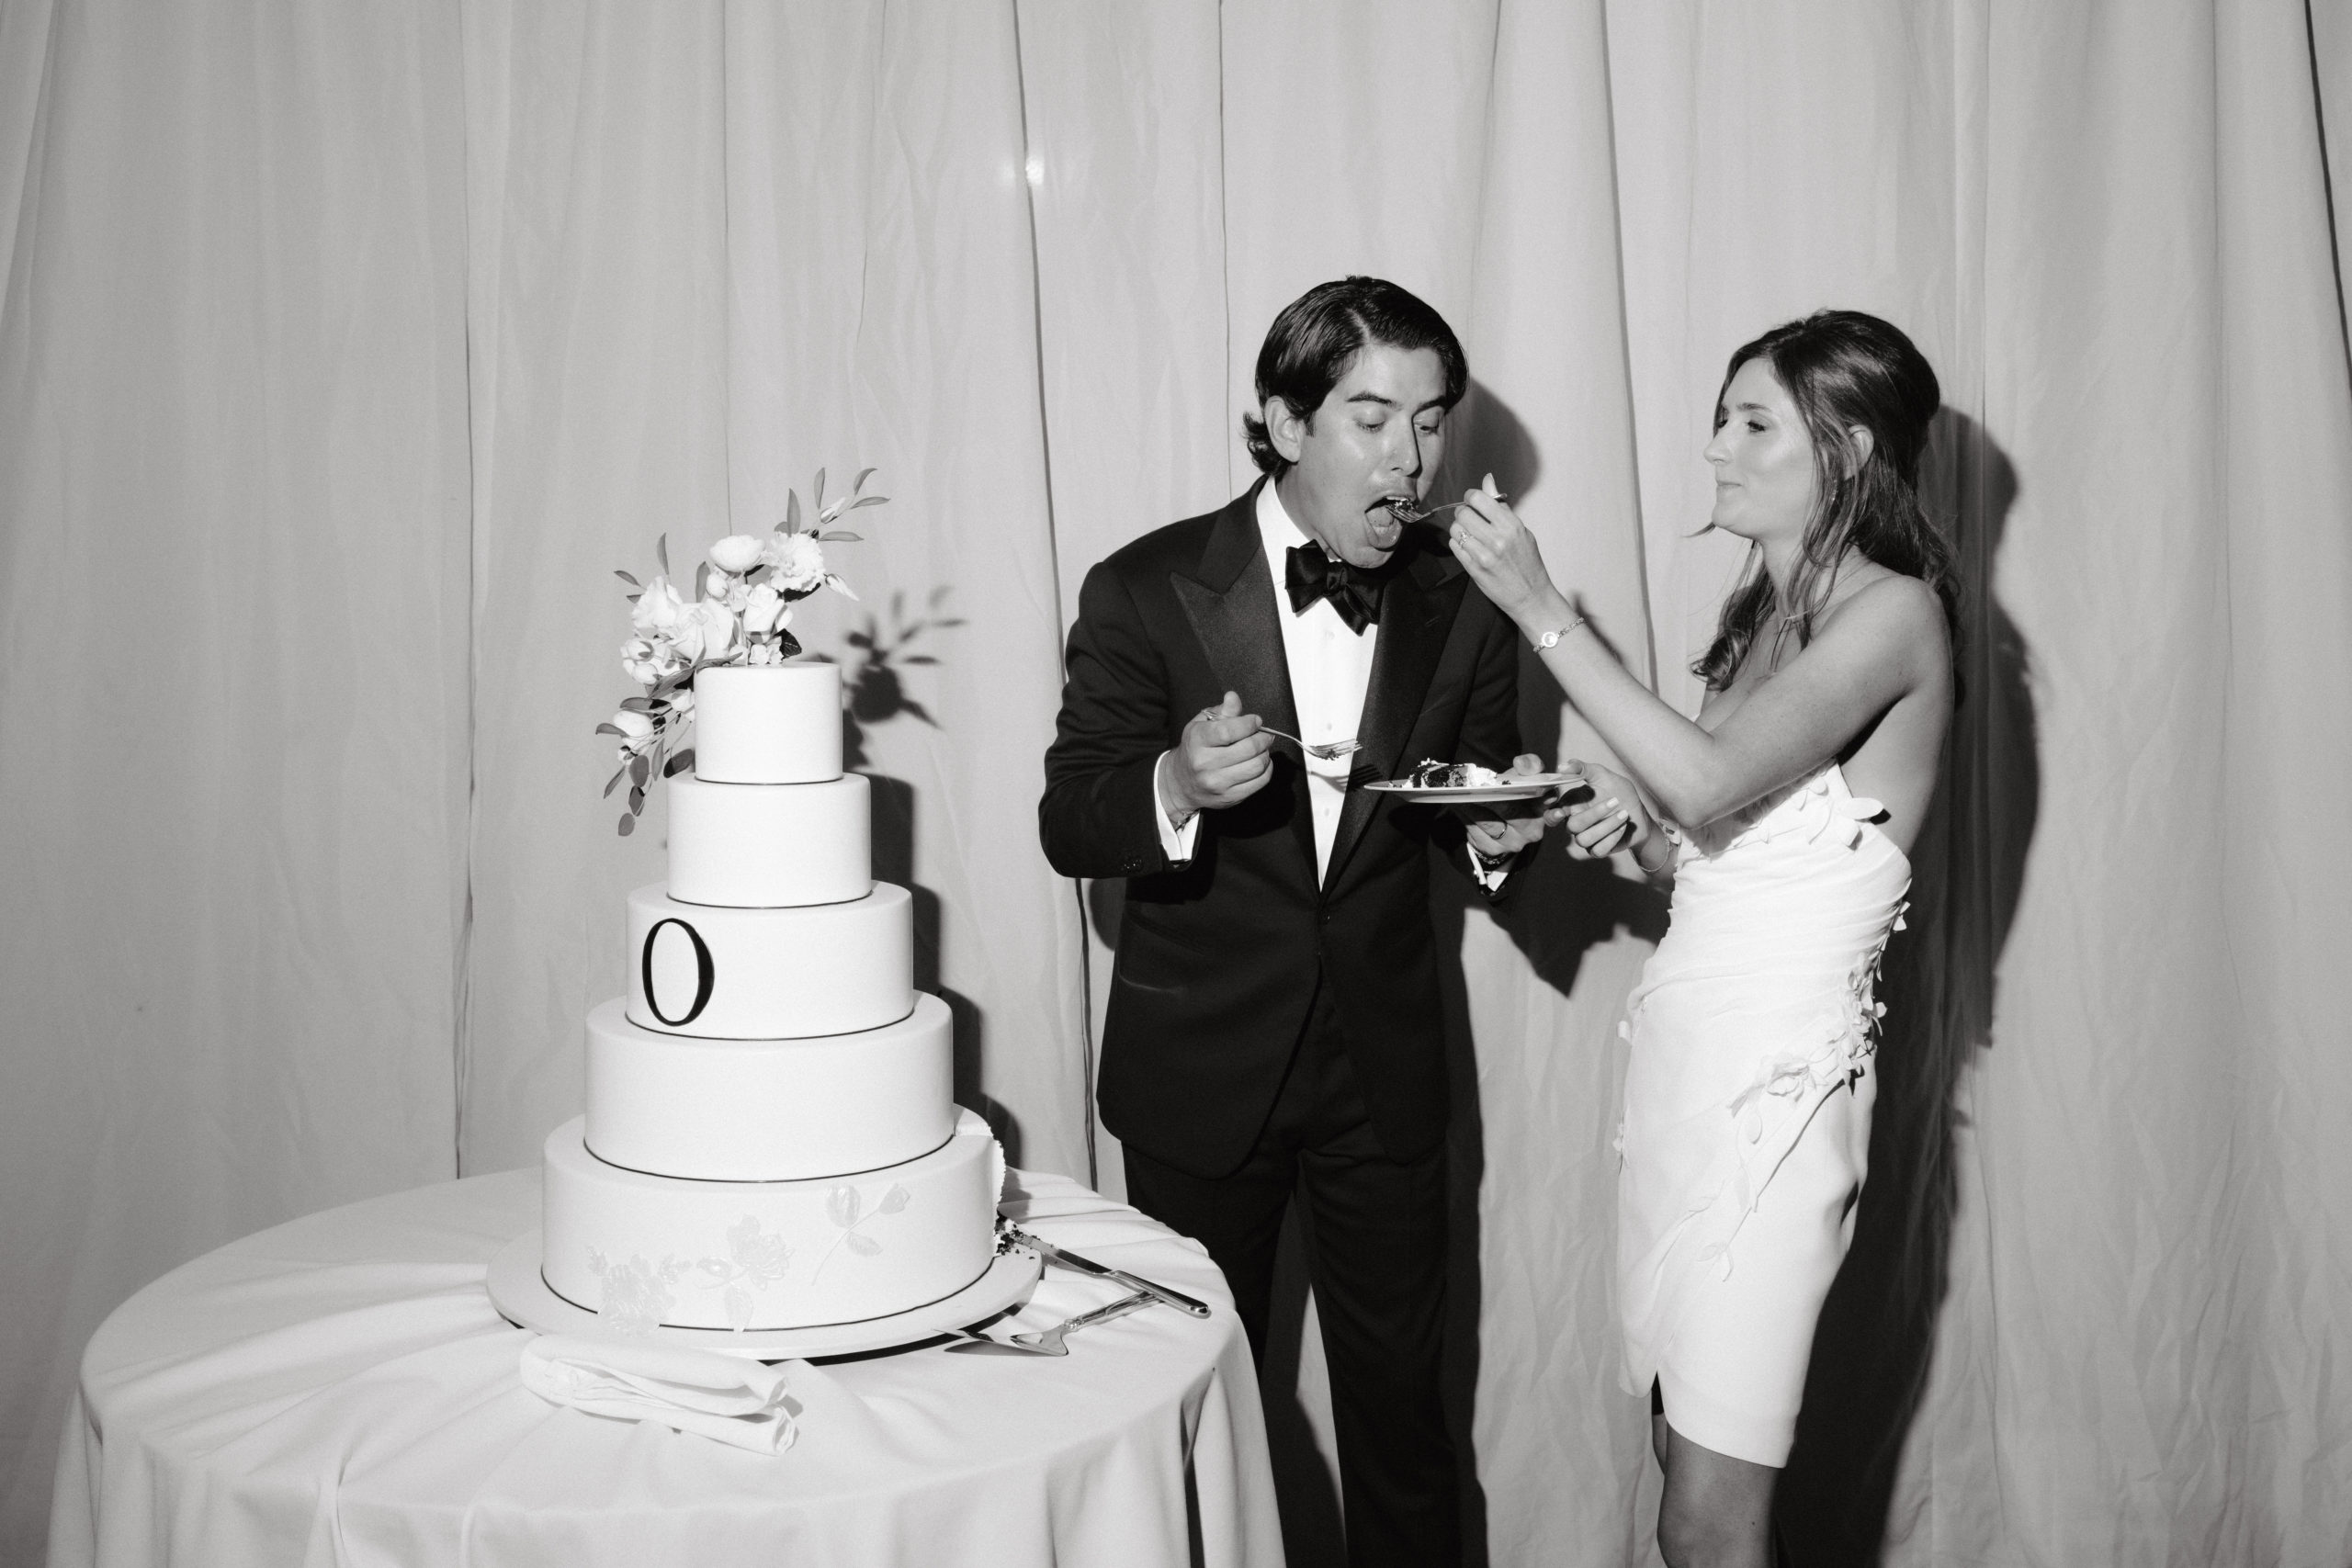 Editorial photo of the newly-weds in the cake-cutting ceremony. Image by Jenny Fu Studio NYC